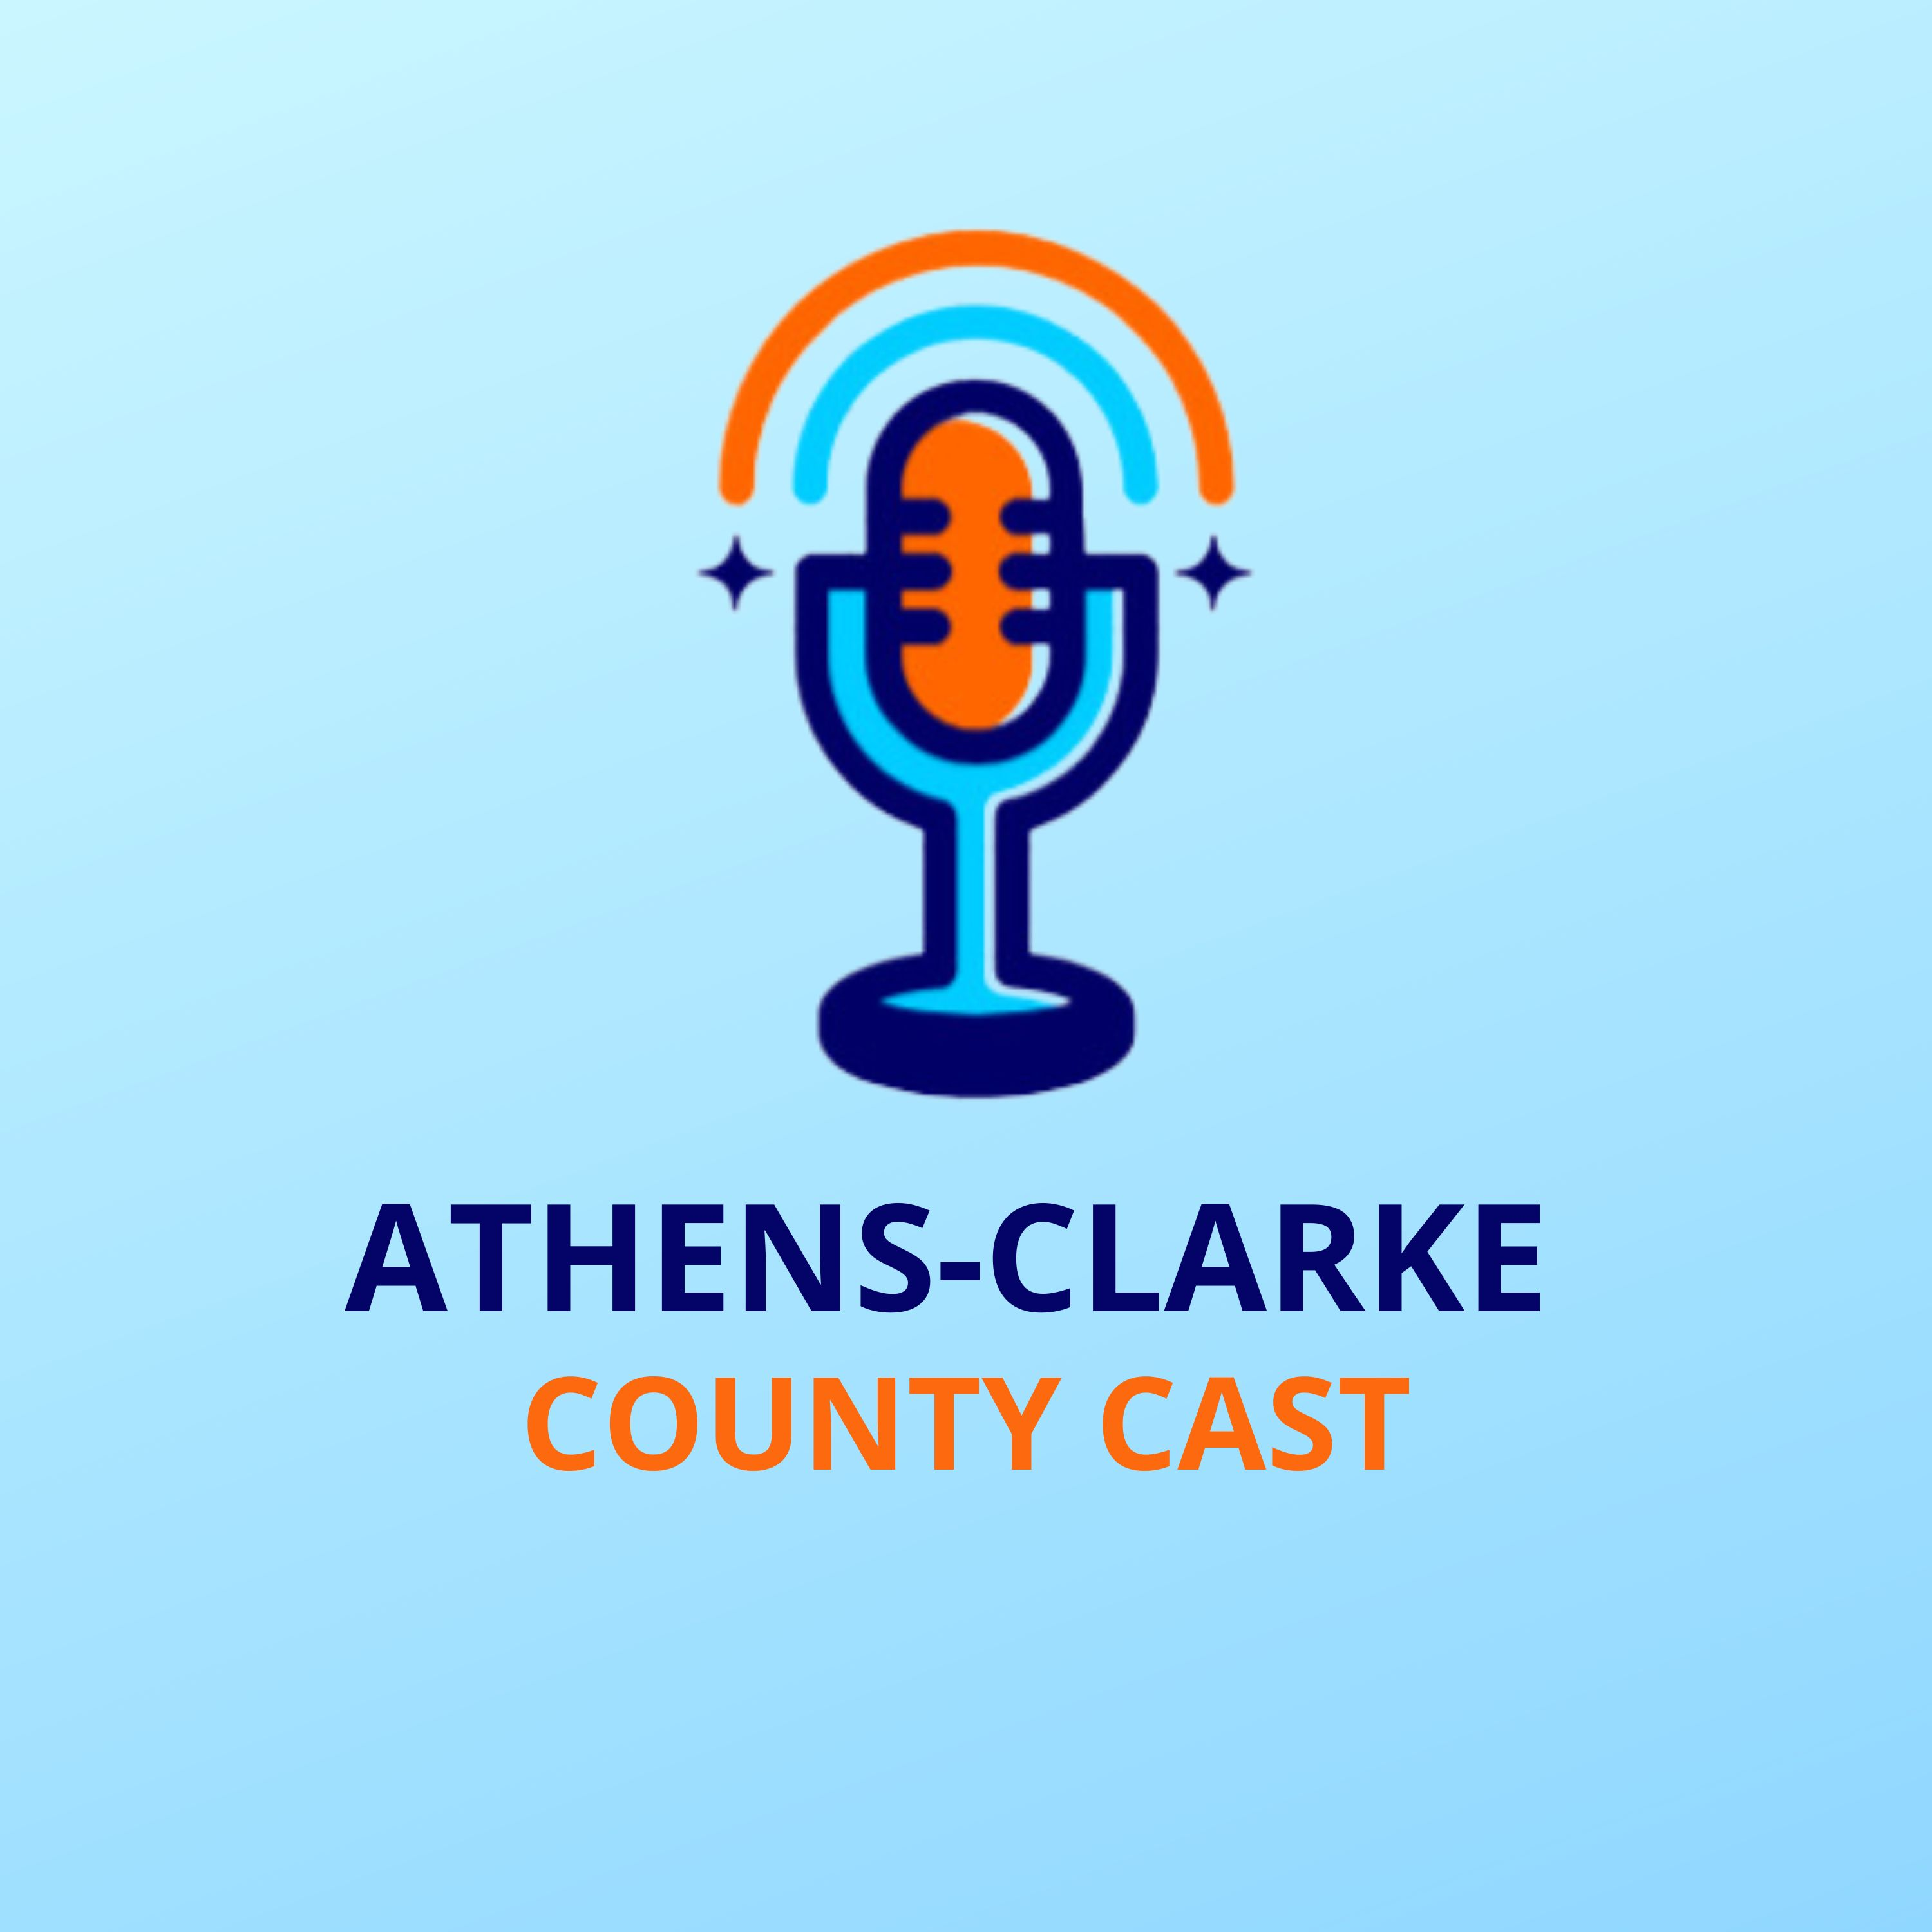 Athens News Podcast with Melissa Carter: Primary Choices and Community Voices: Navigating Athens’ Pivotal Moments - Featuring District 10 Democratic candidates Jessica Fore and Lexy Doherty